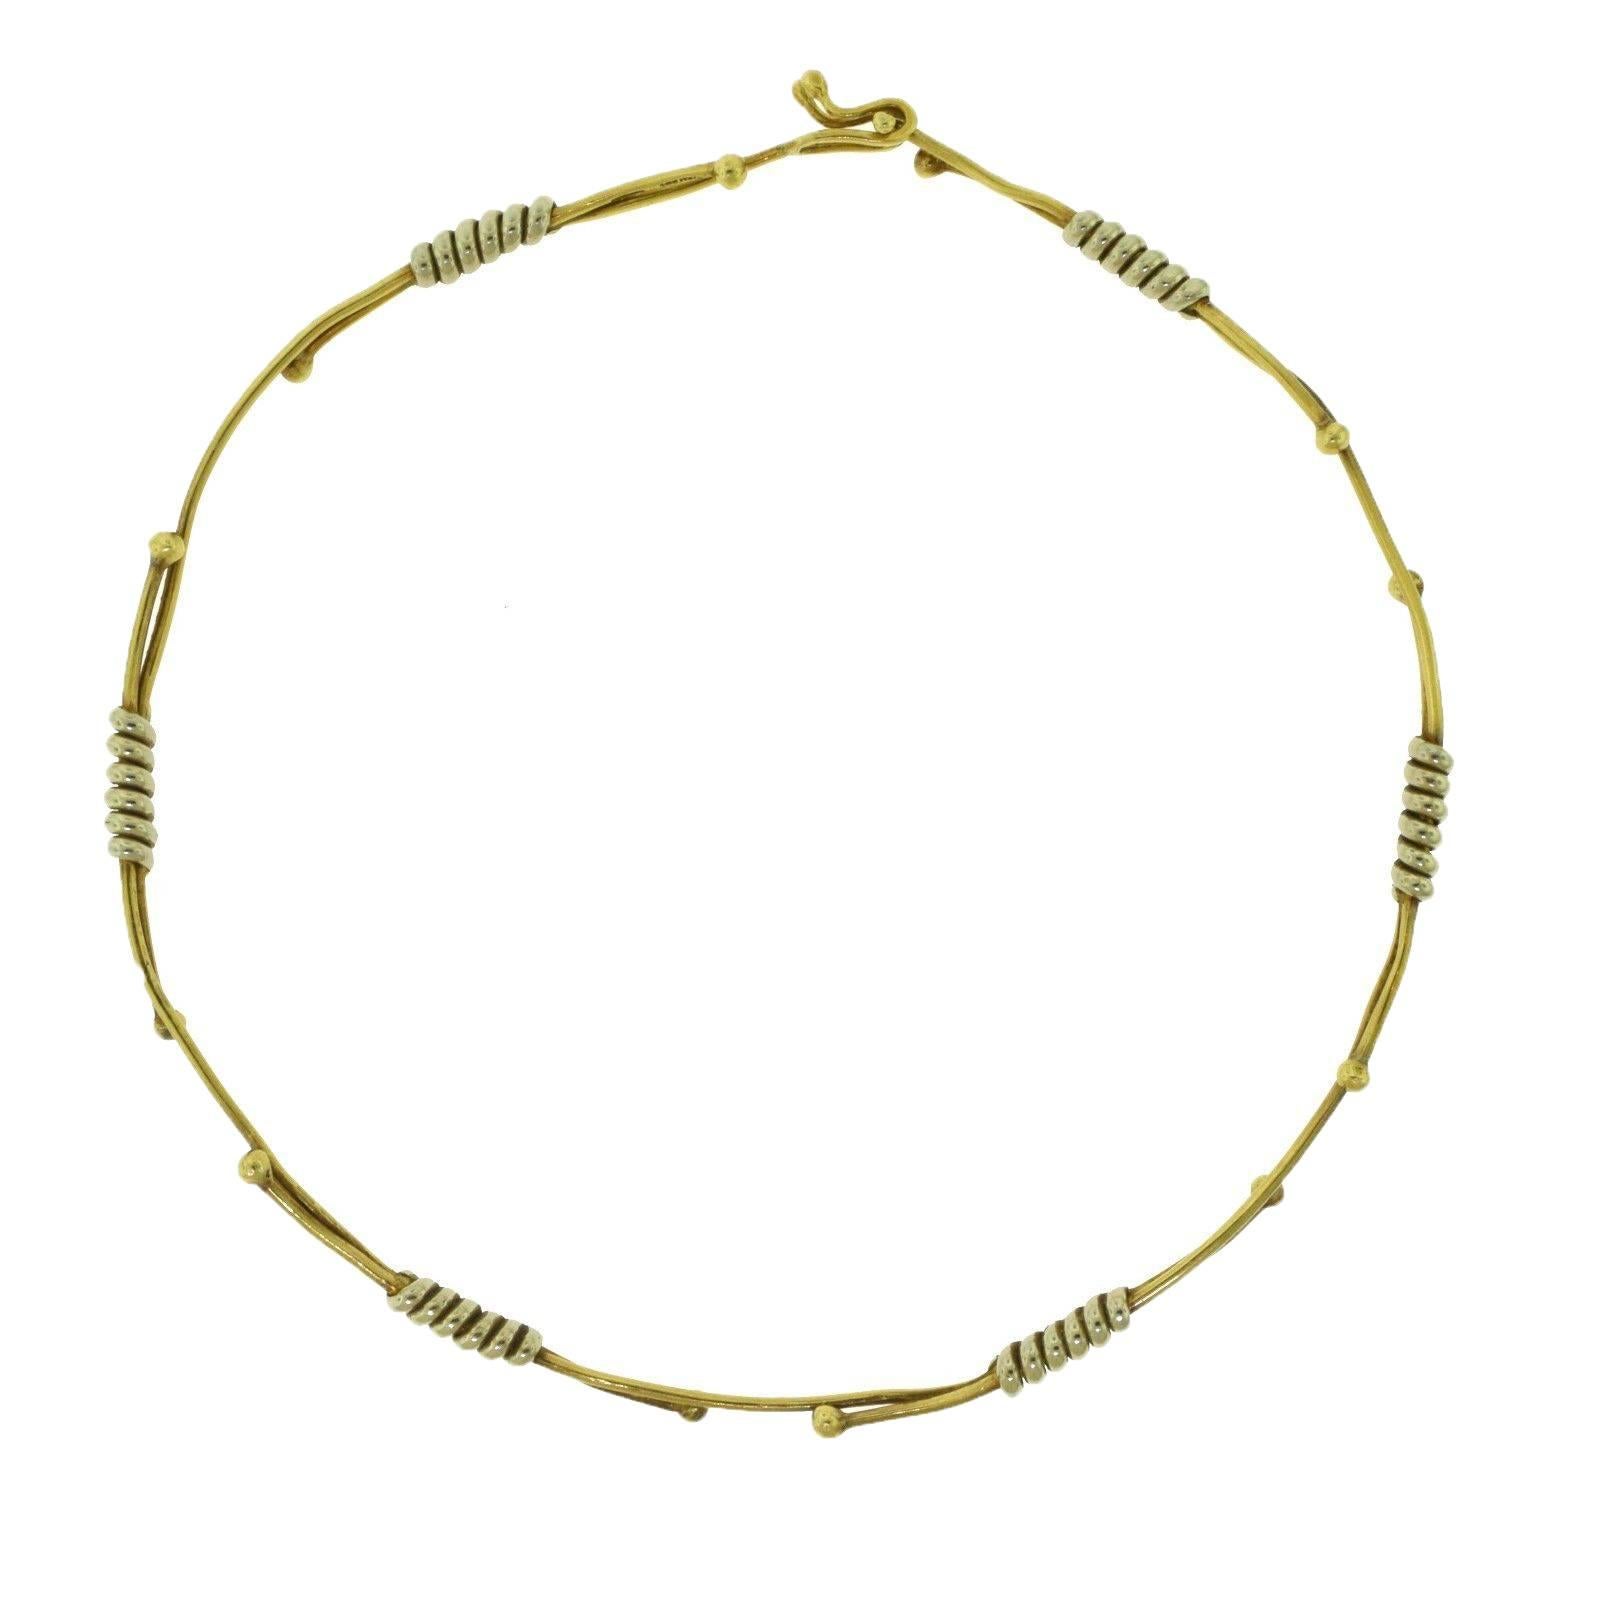 A vintage choker designed and created by Cartier. Twirling and twisting, this cable choker rests atop the neck in such a subtle and elegant way, it is sure to stun and turn heads.

Item Specifications:
Designer: Cartier
Style: Twist Cable